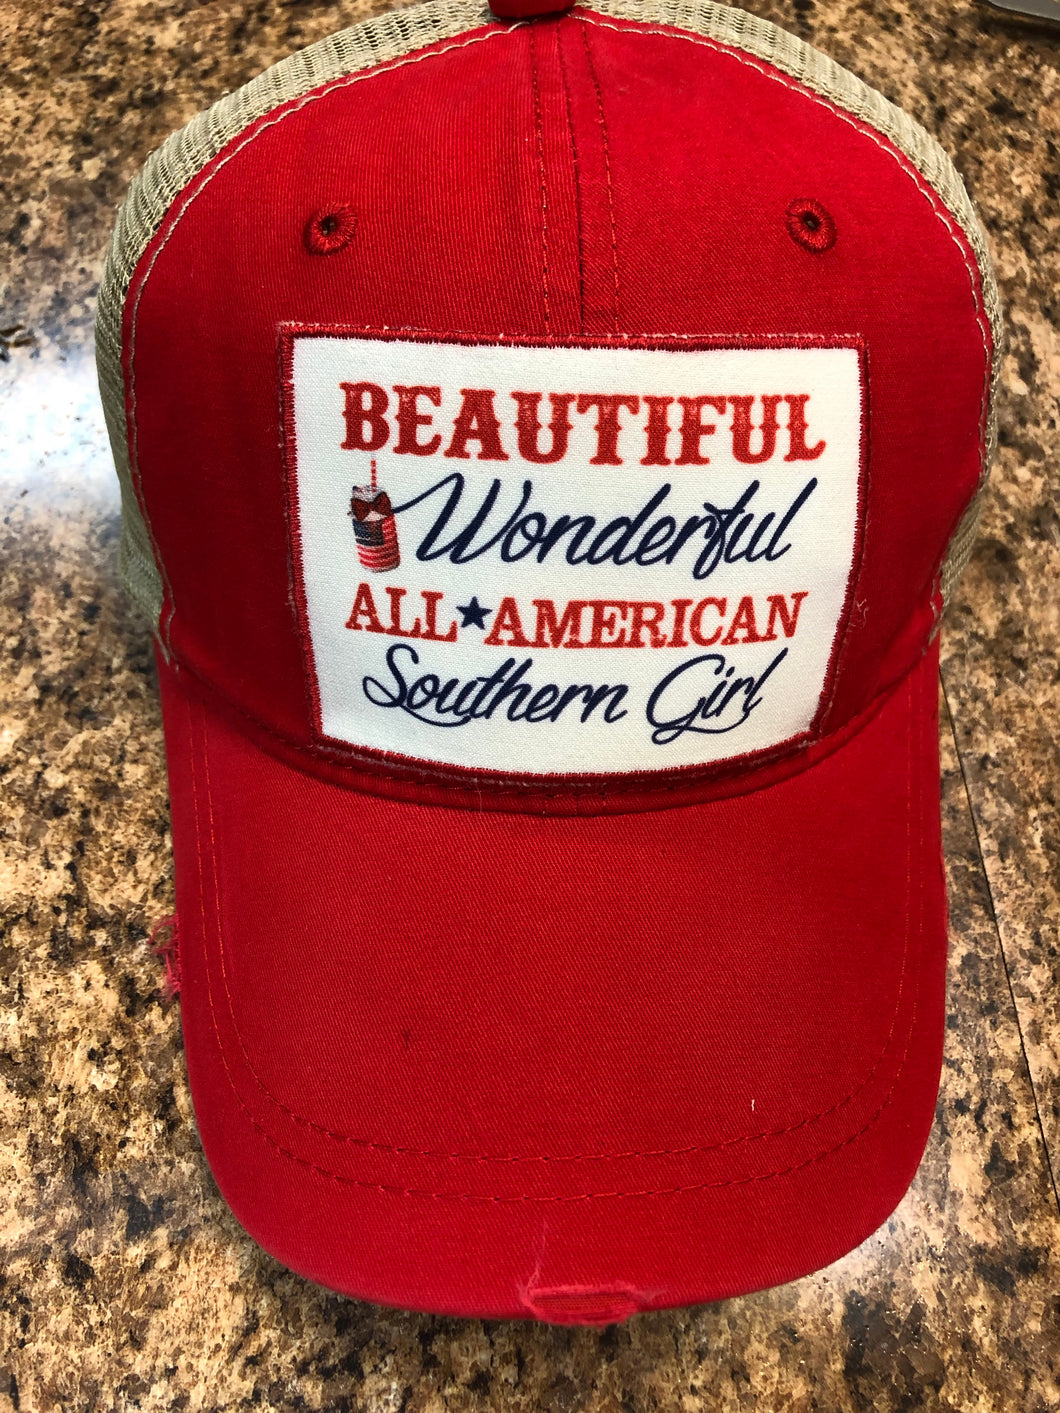 Southern Grace Beautiful, Wonderful All-American Southern Girl Red with Beige Mesh Hat